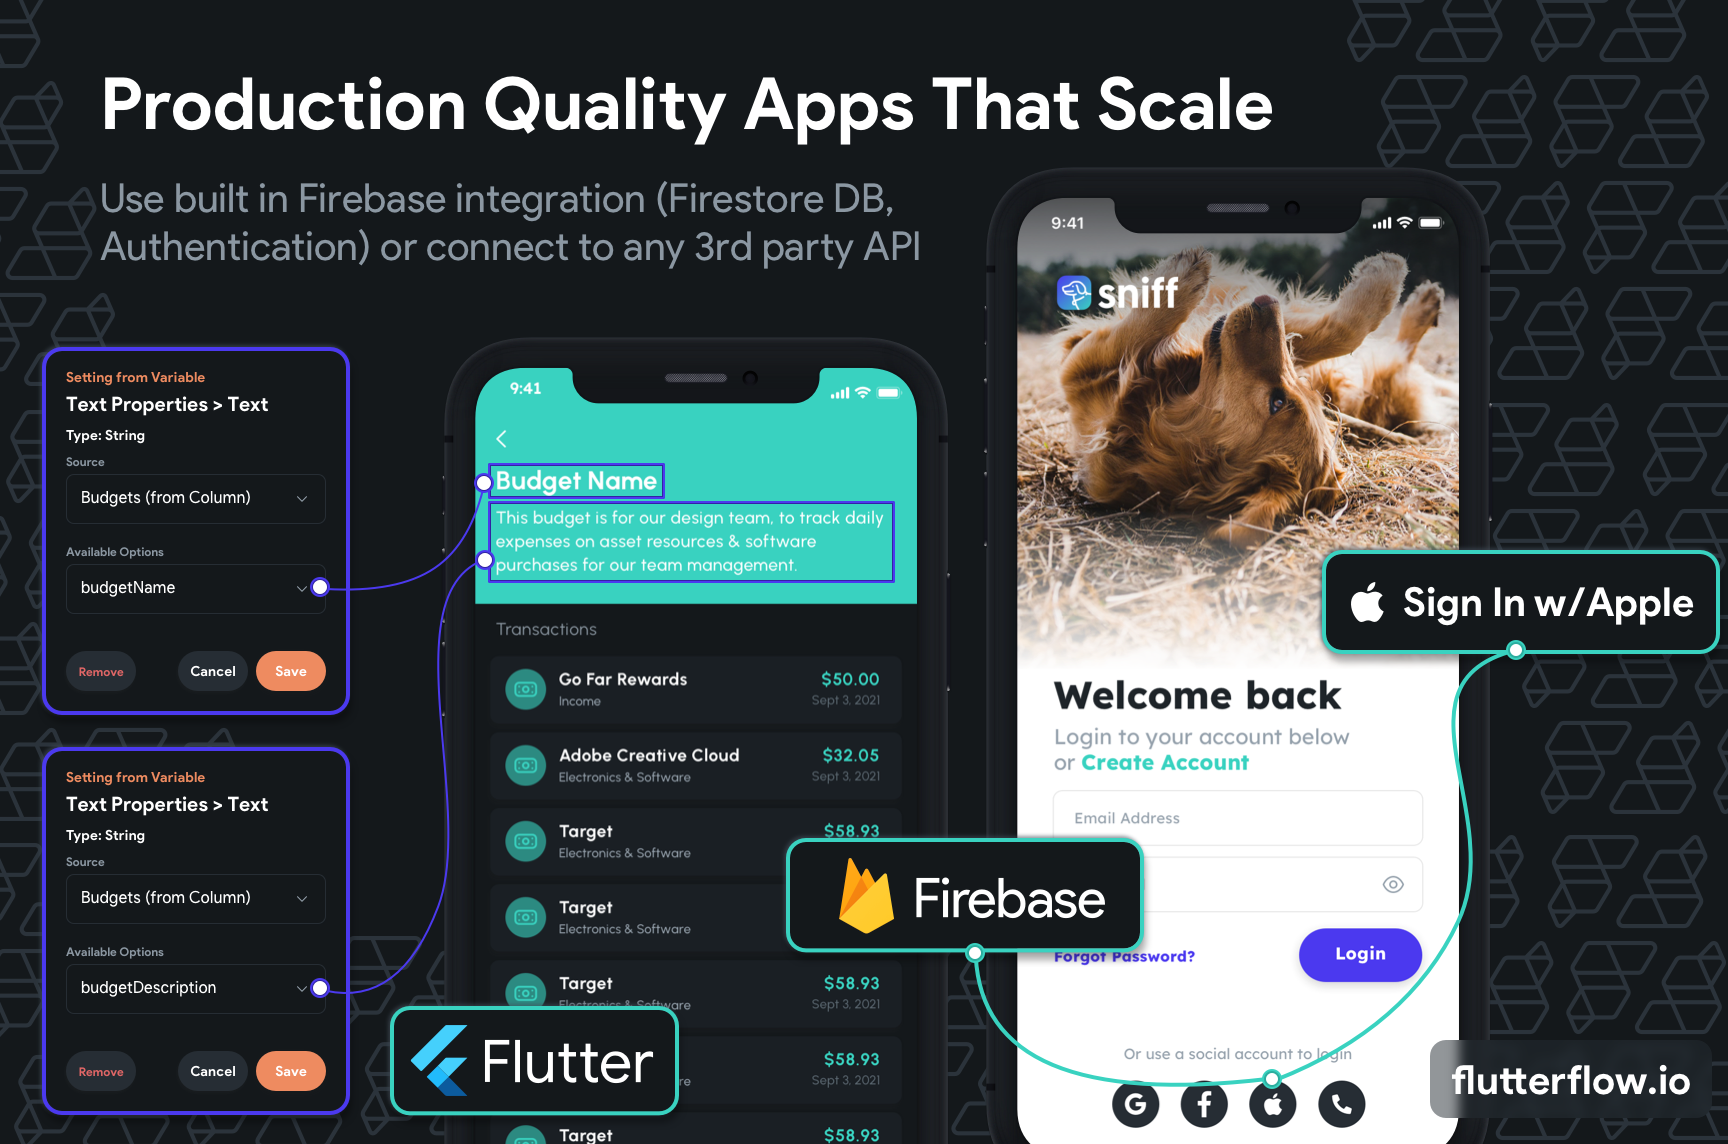 FlutterFlow Software - FlutterFlow Firebase and 3rd Party API integration for production quality apps that scale.